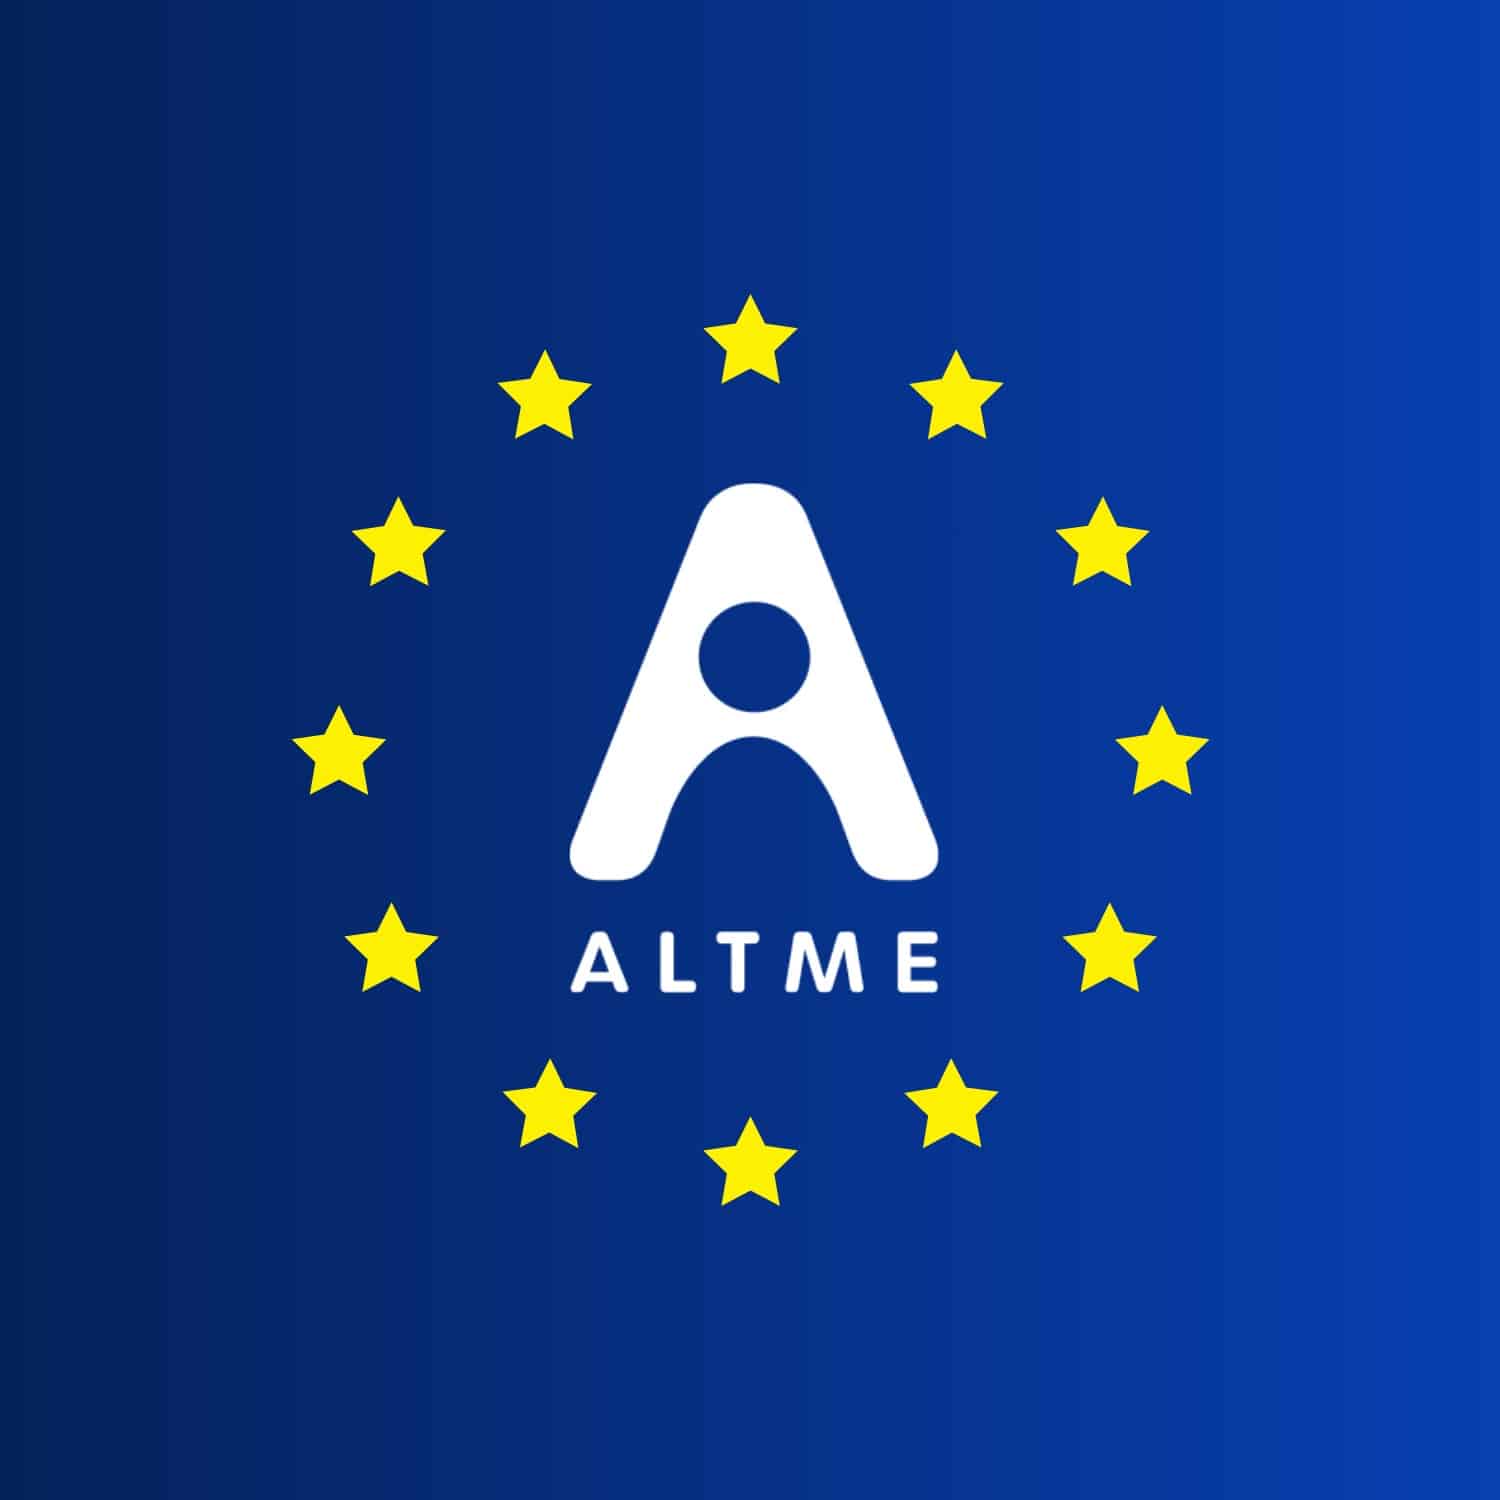 Altme announces its conformity with the European Blockchain Services Infrastructure, backed by the European Commission and 29 countries. 